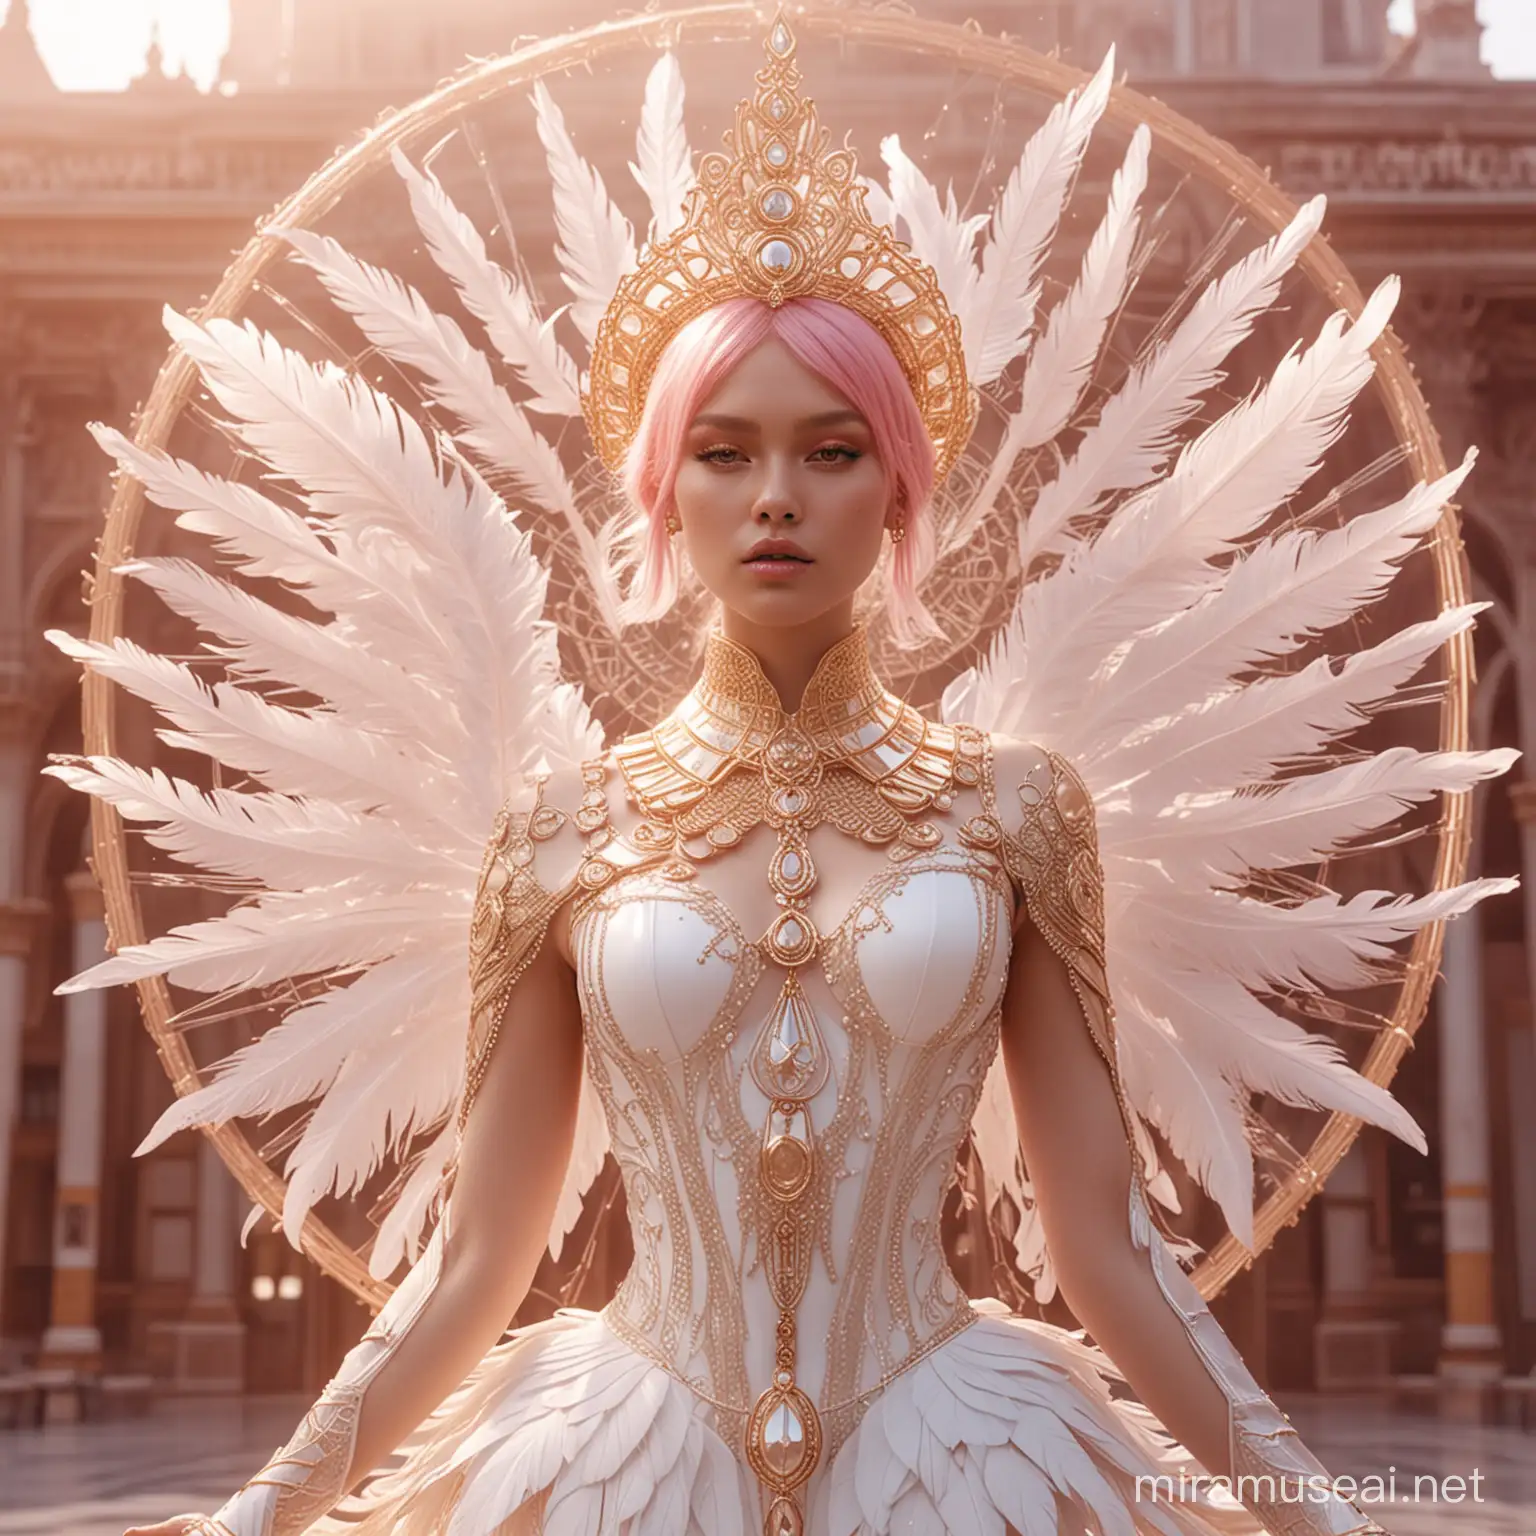 Futuristic Swan Goddess Ethereal White and Gold Fantasy Portrait